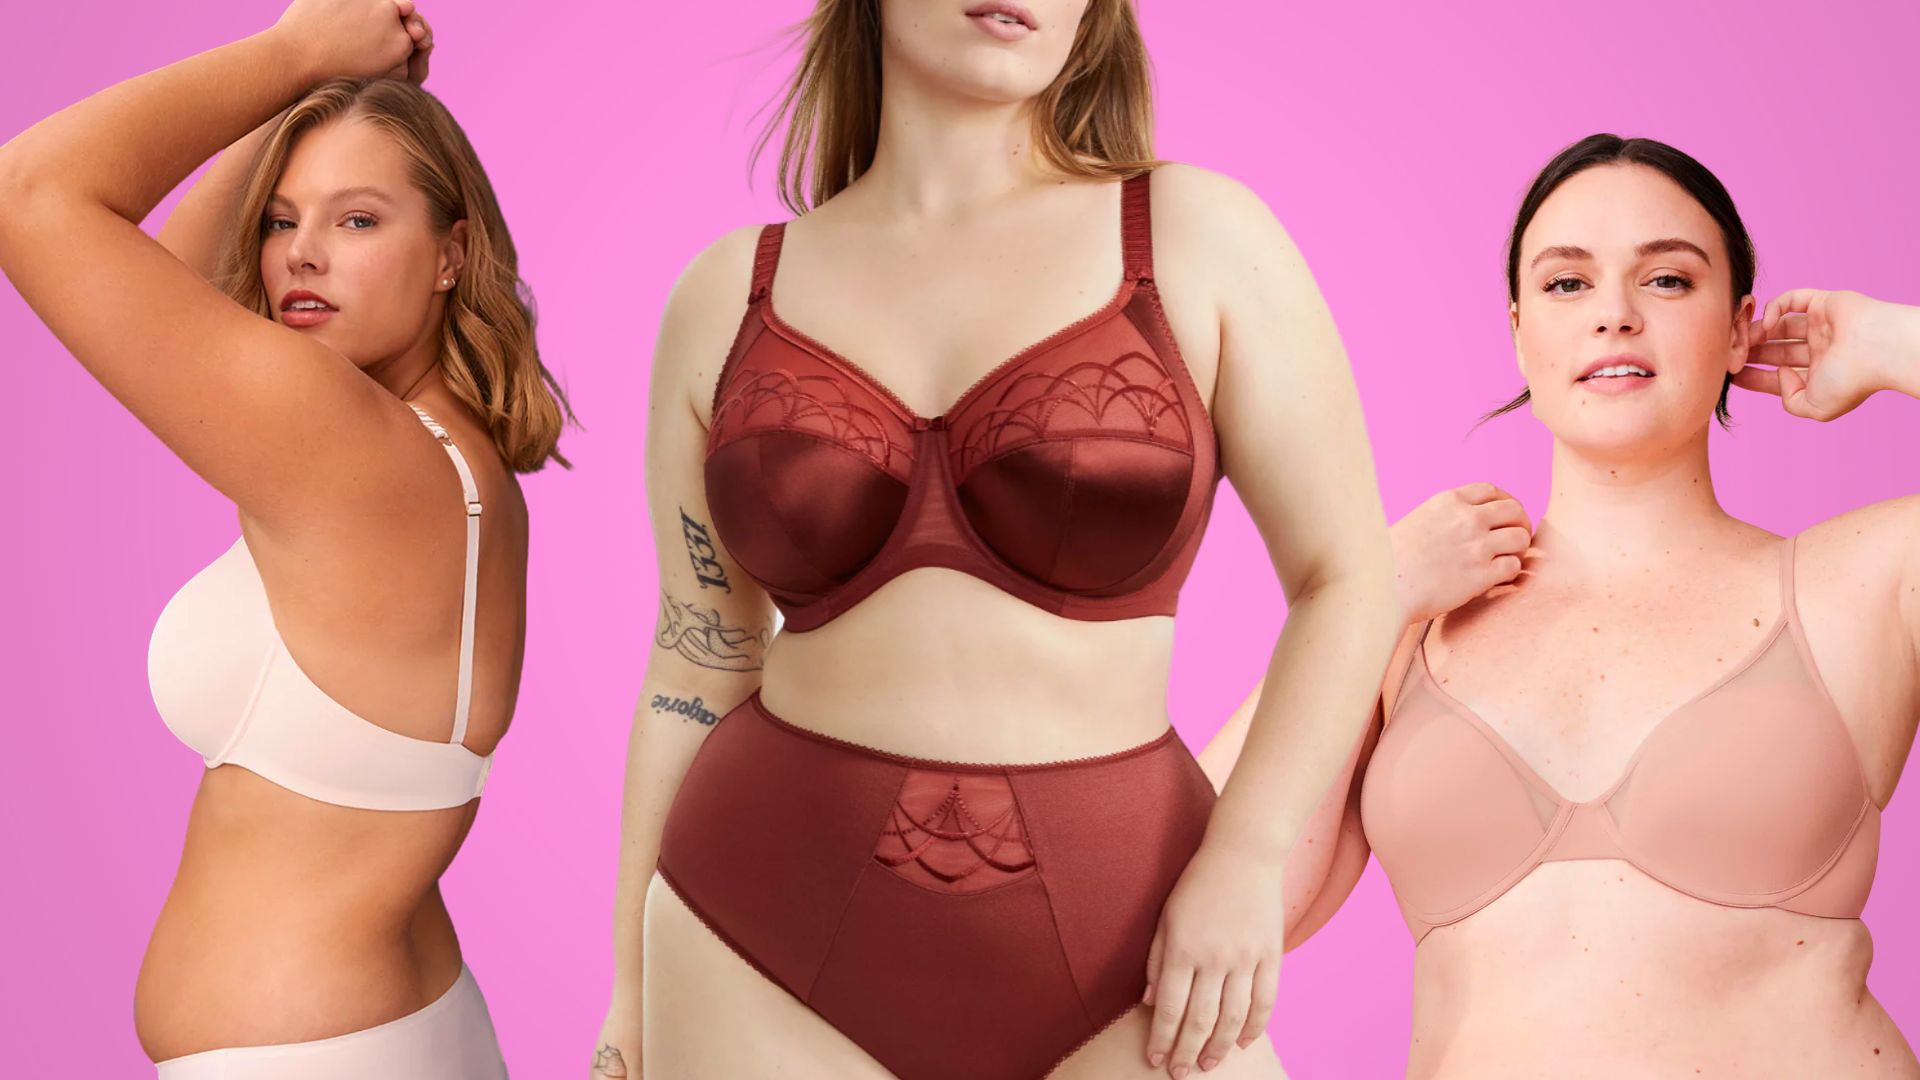 New mommies – here is a perfect bra designed just for you! Jockey